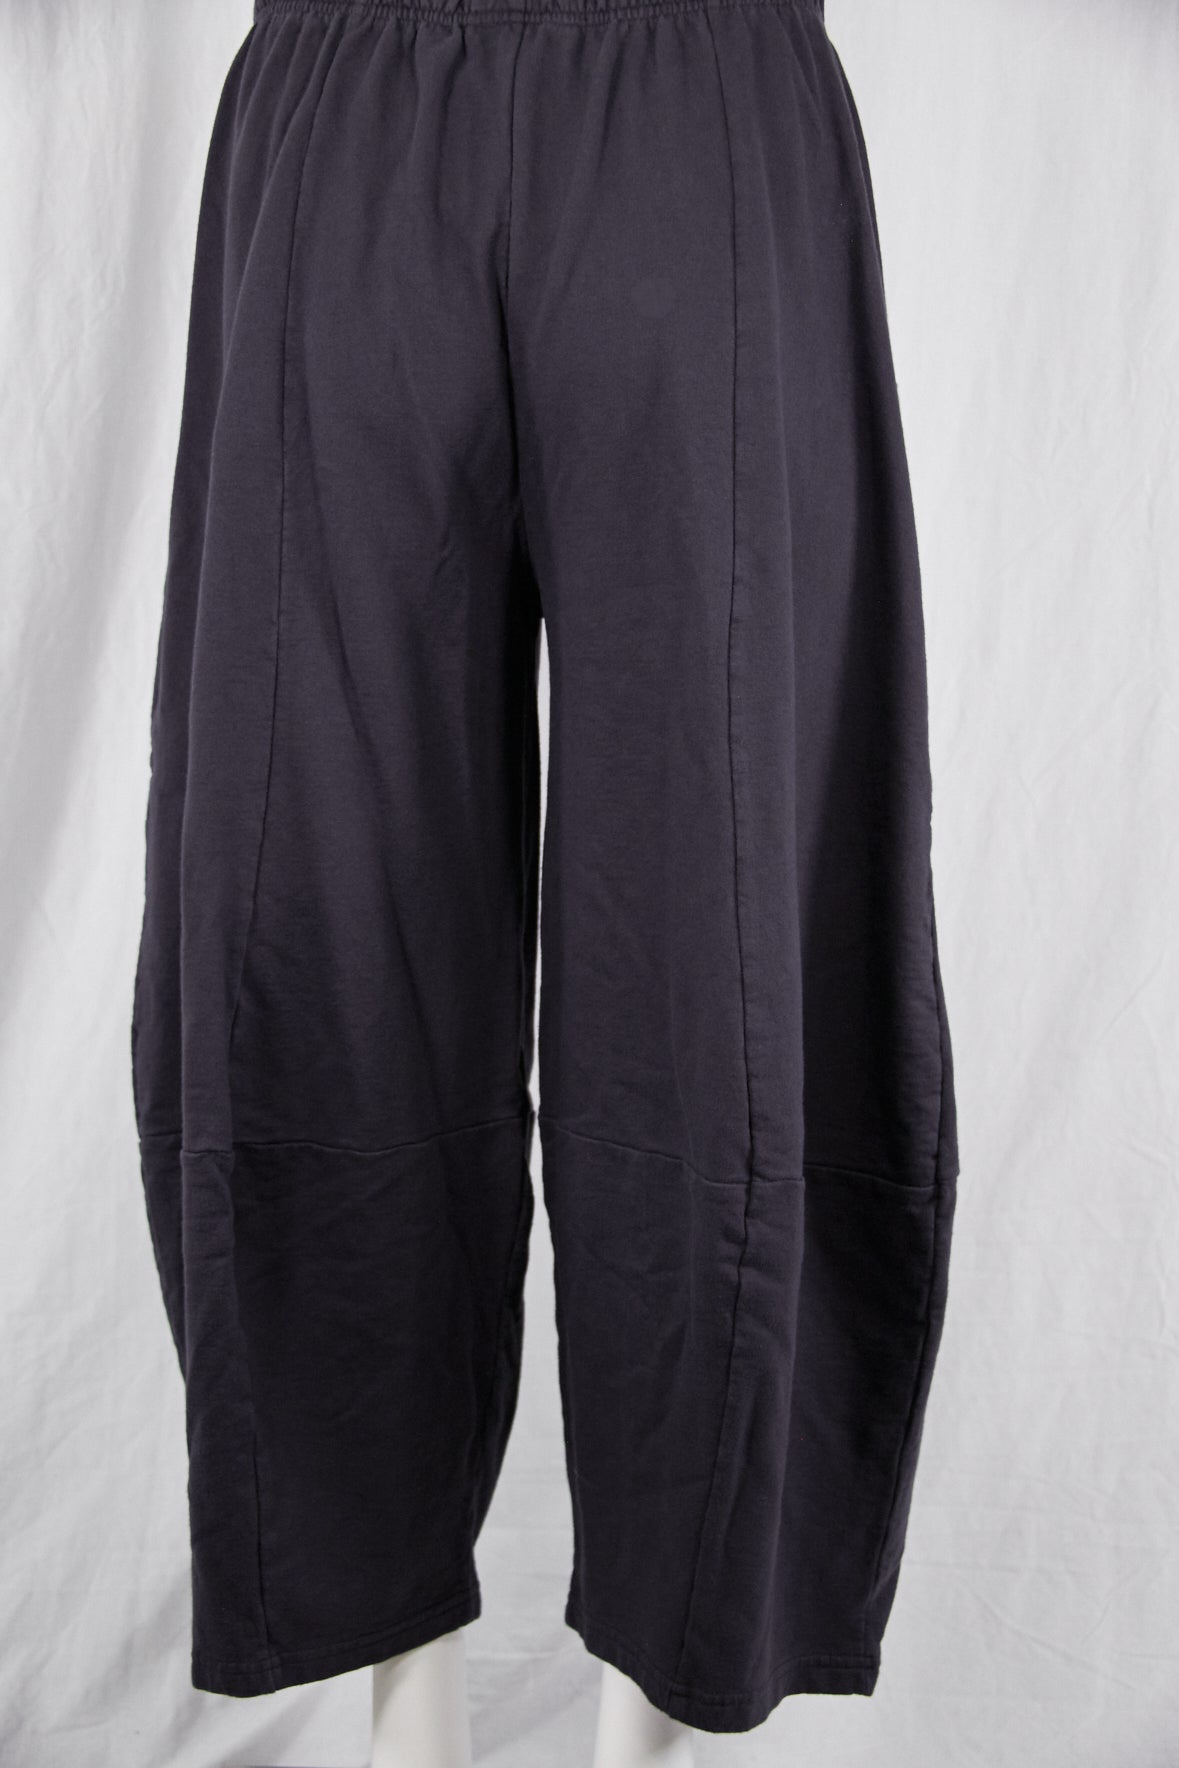 3292 Winter Four Square Pant with Pockets-Plumblack